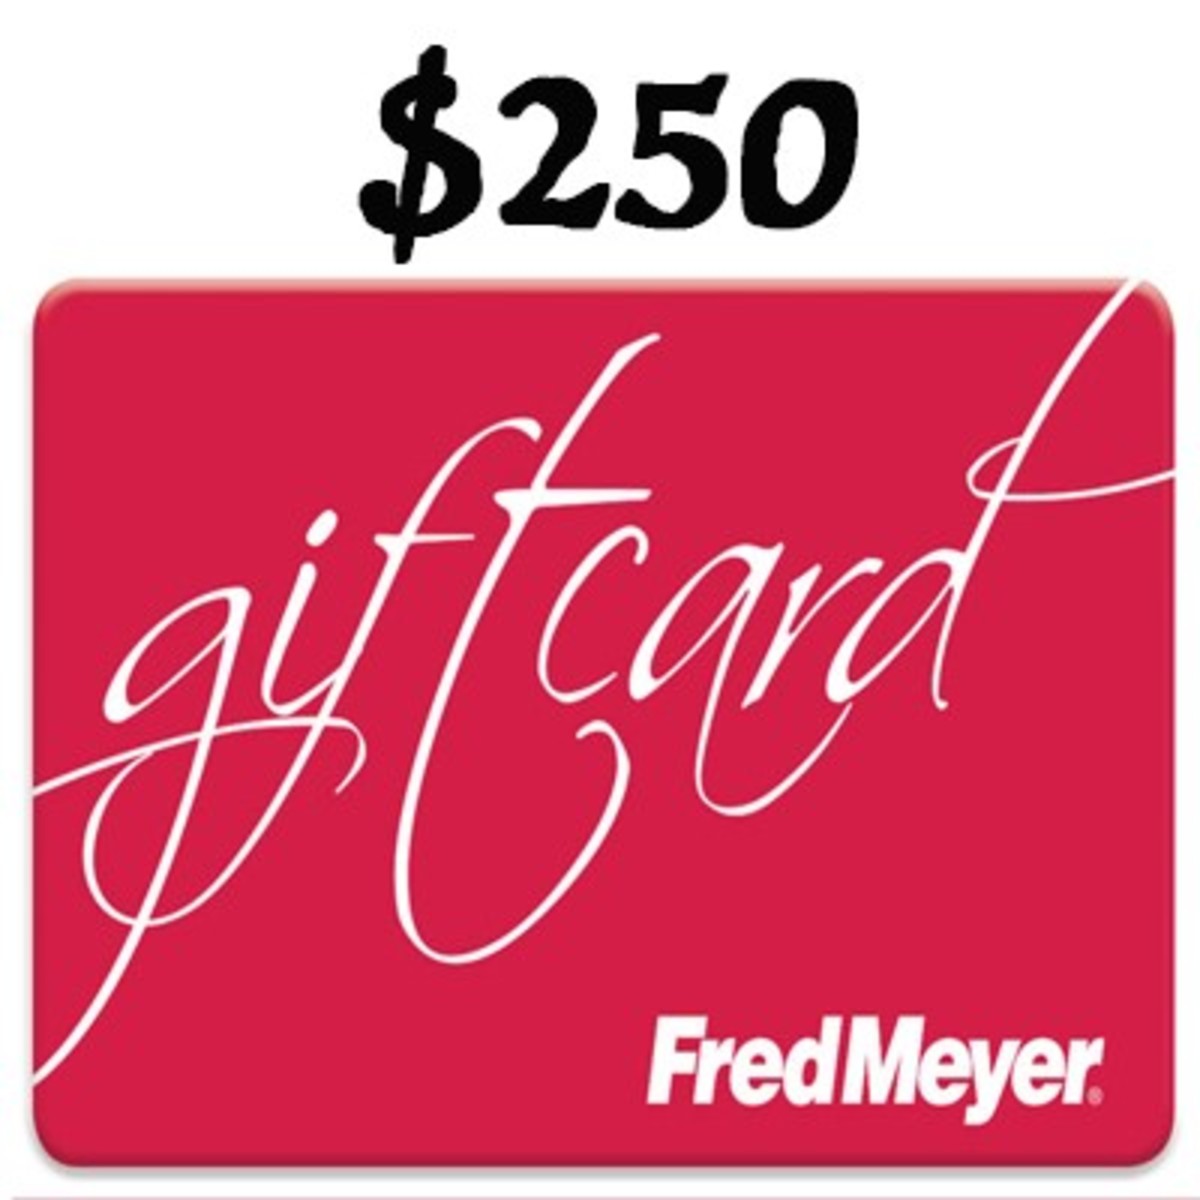 buying-a-gift-card-at-fred-meyer